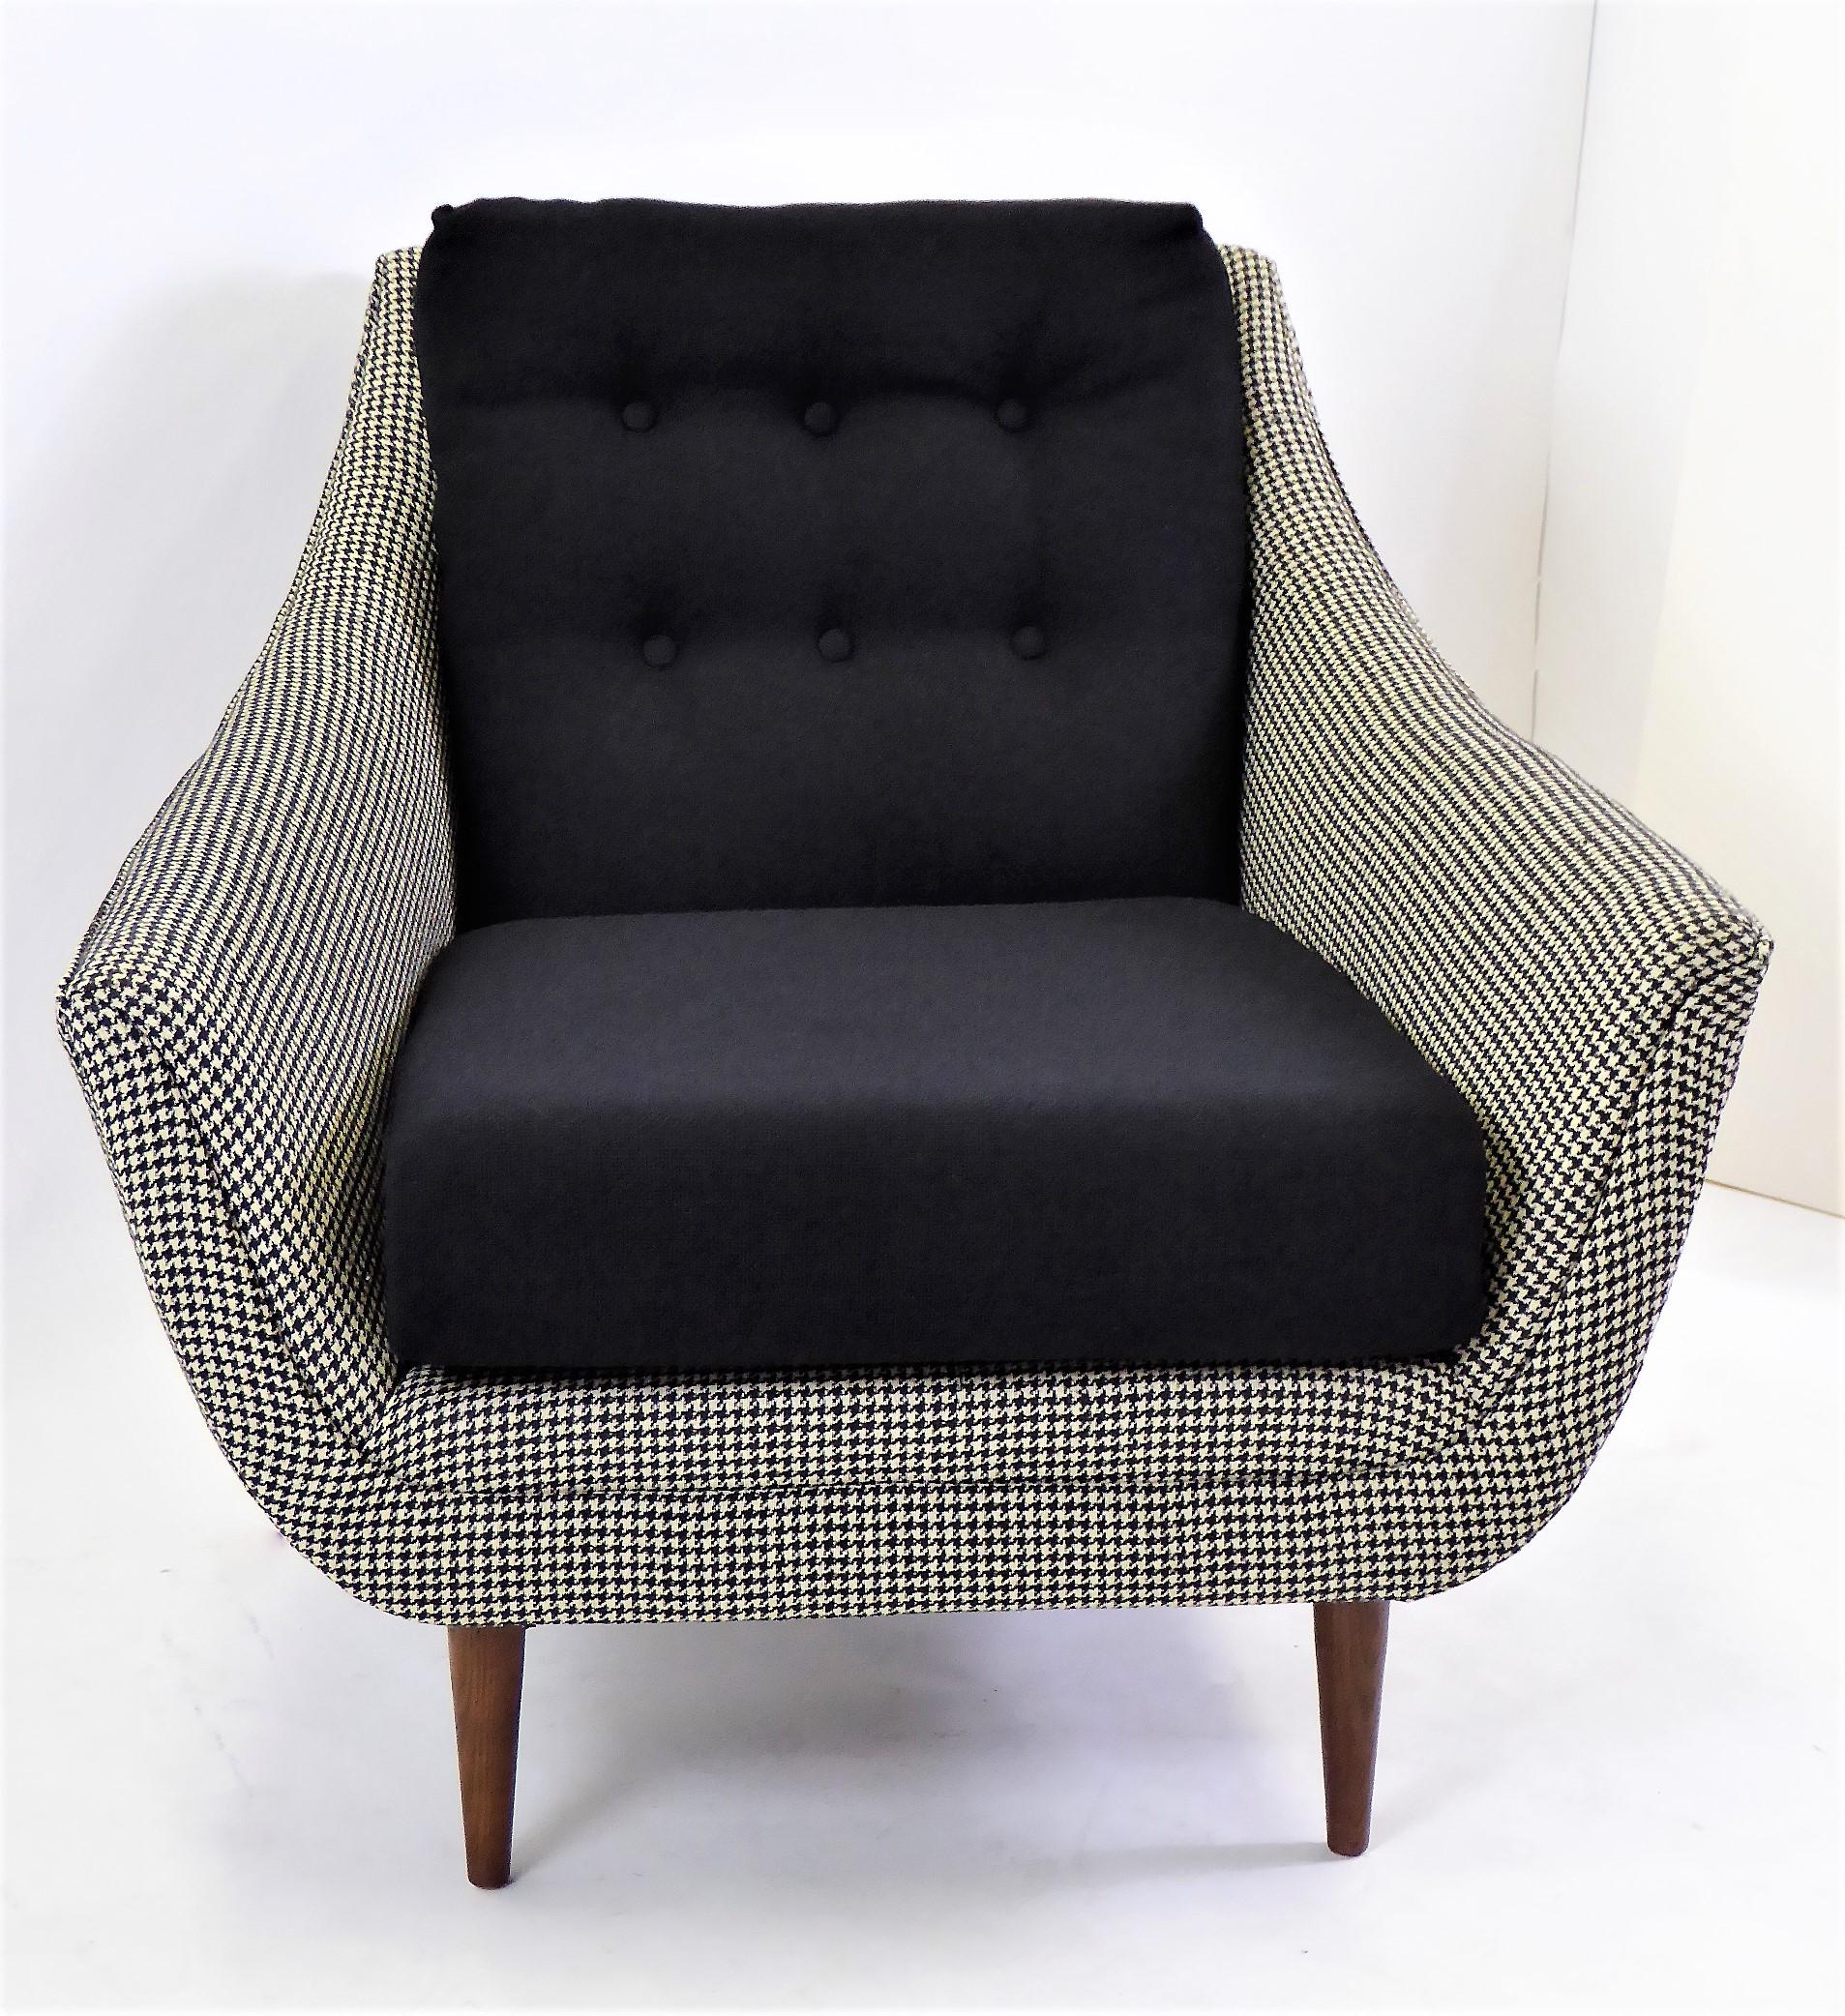 Lovely 1950s styling highlight this Adrian Pearsall lounge chair. Now upholstered in a houndstooth weave and a black tight hopsack weave. Great tapering walnut legs. A comfortable scoop styling.

Measurements: 32 inches wide at front x 23 inches